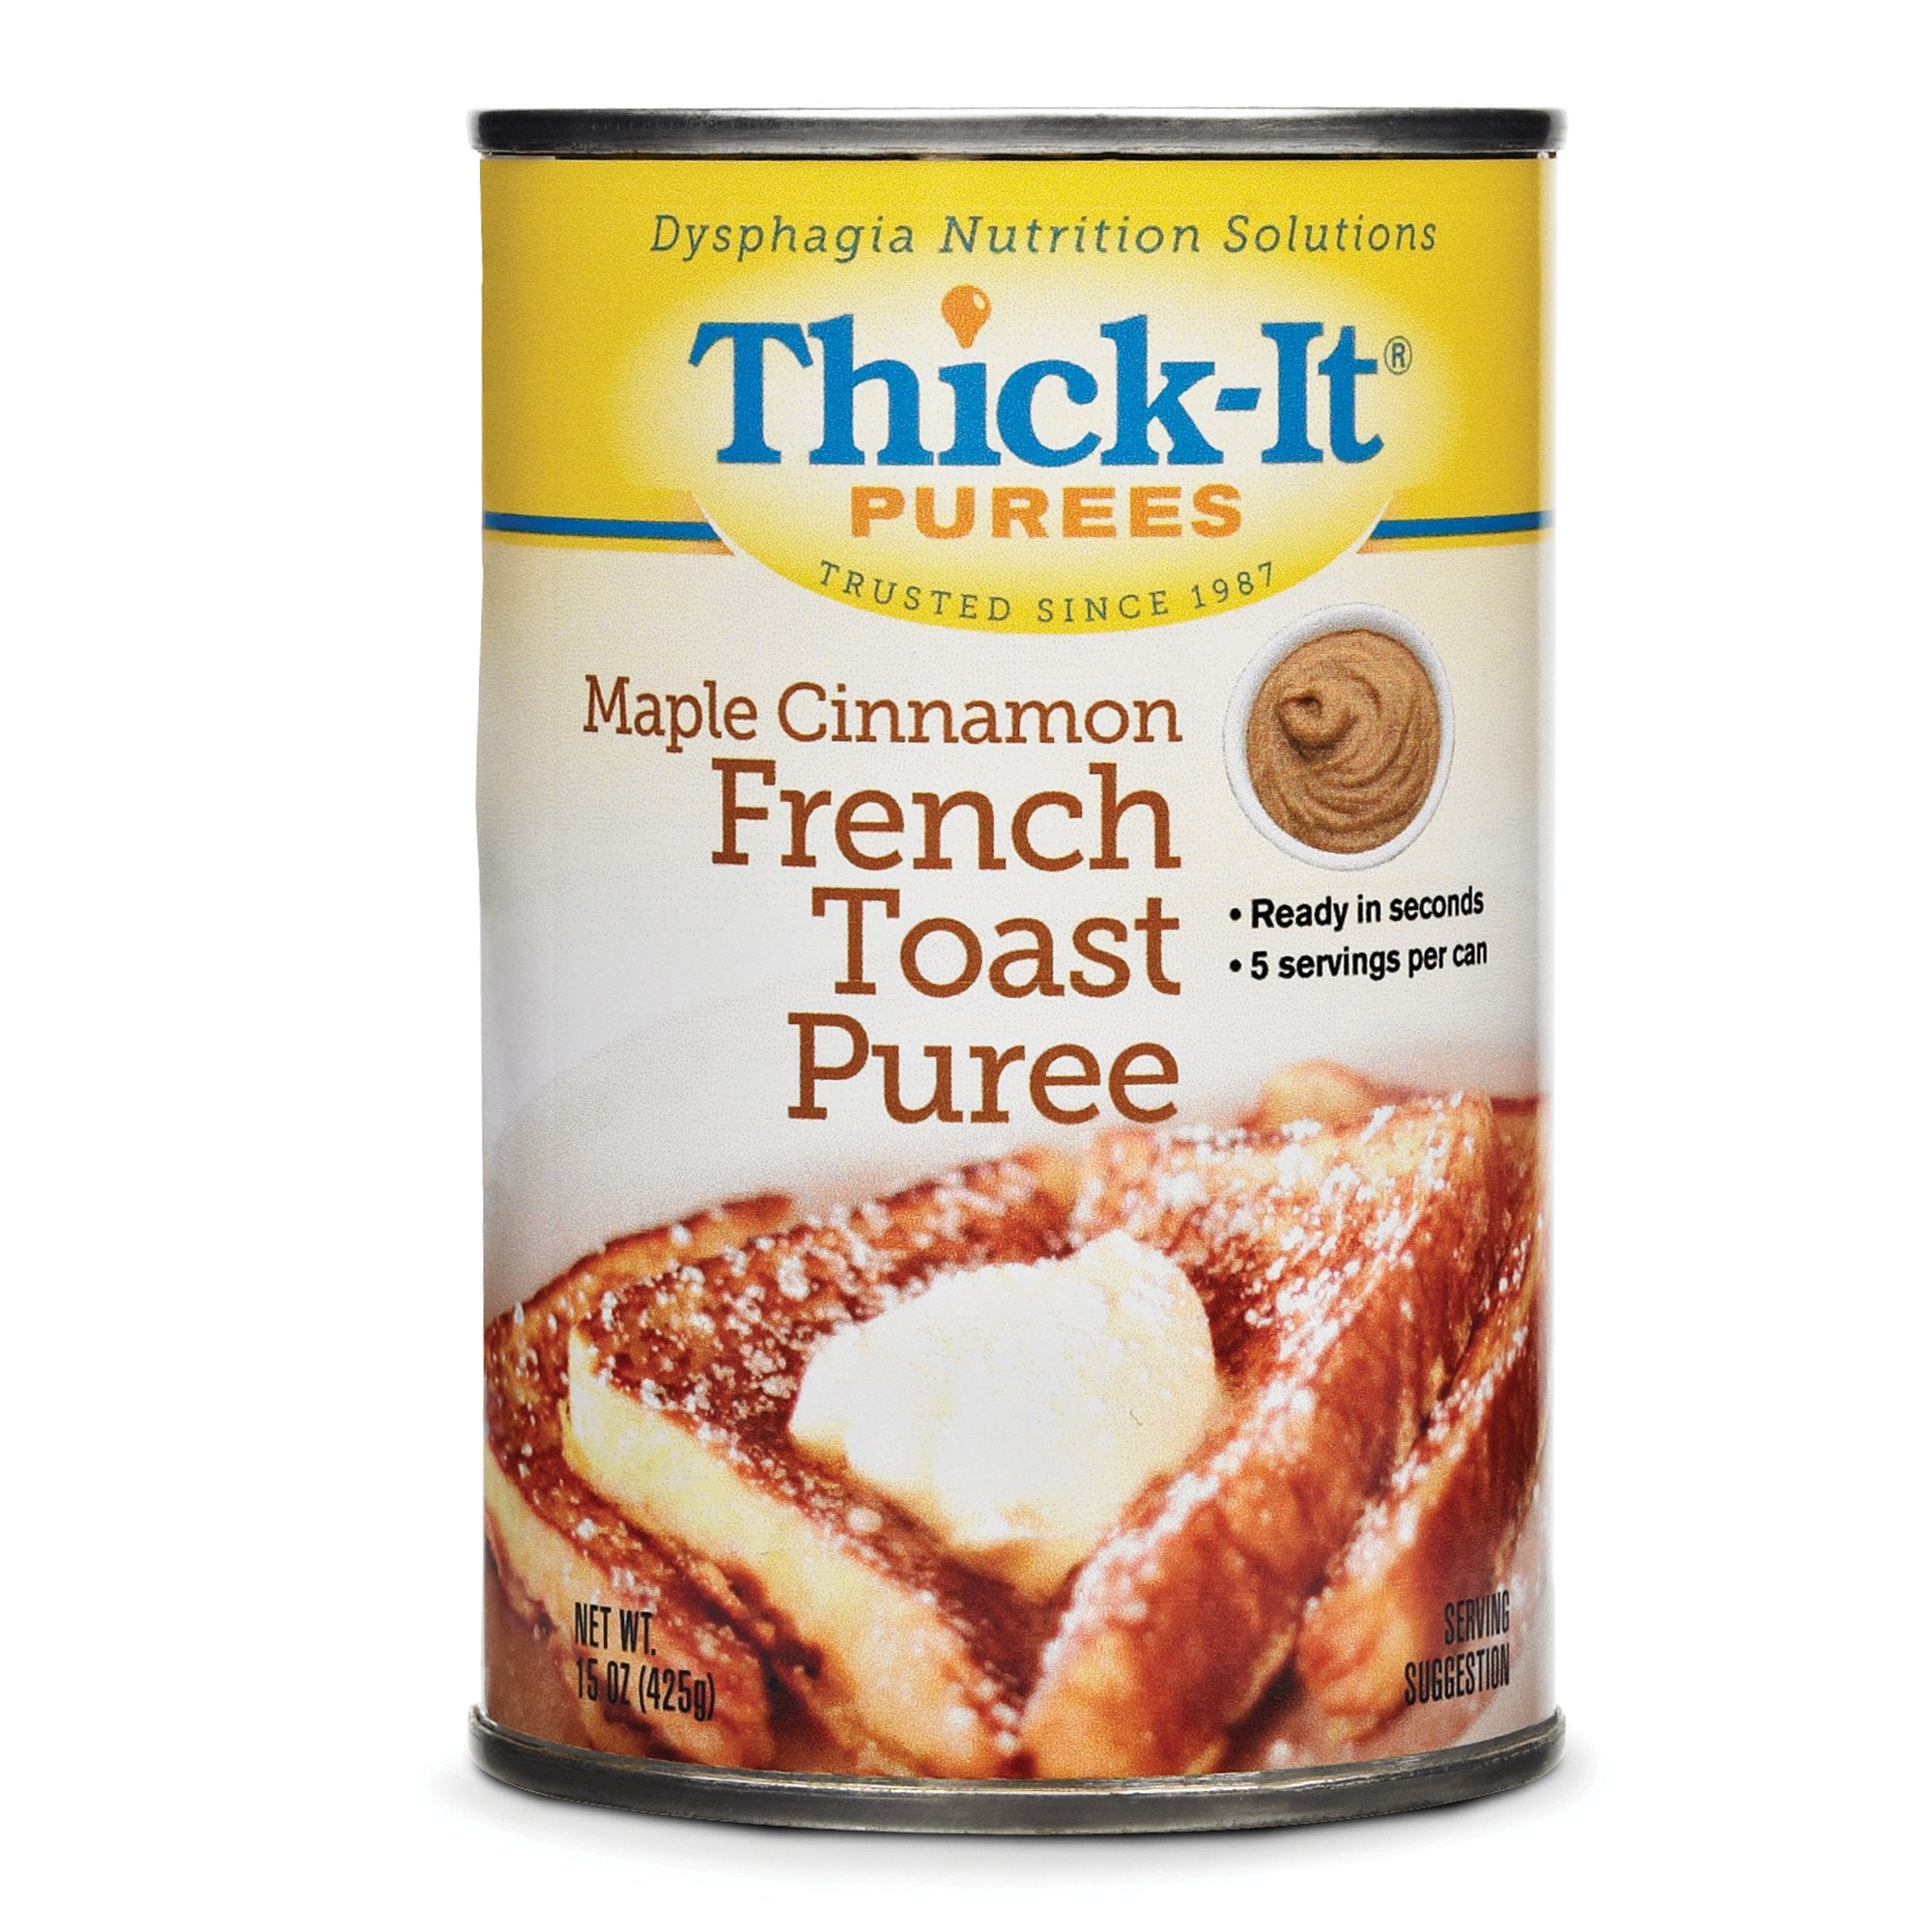 Thick-It® Maple Cinnamon French Toast Purée, 15 oz. Can (12 Units)